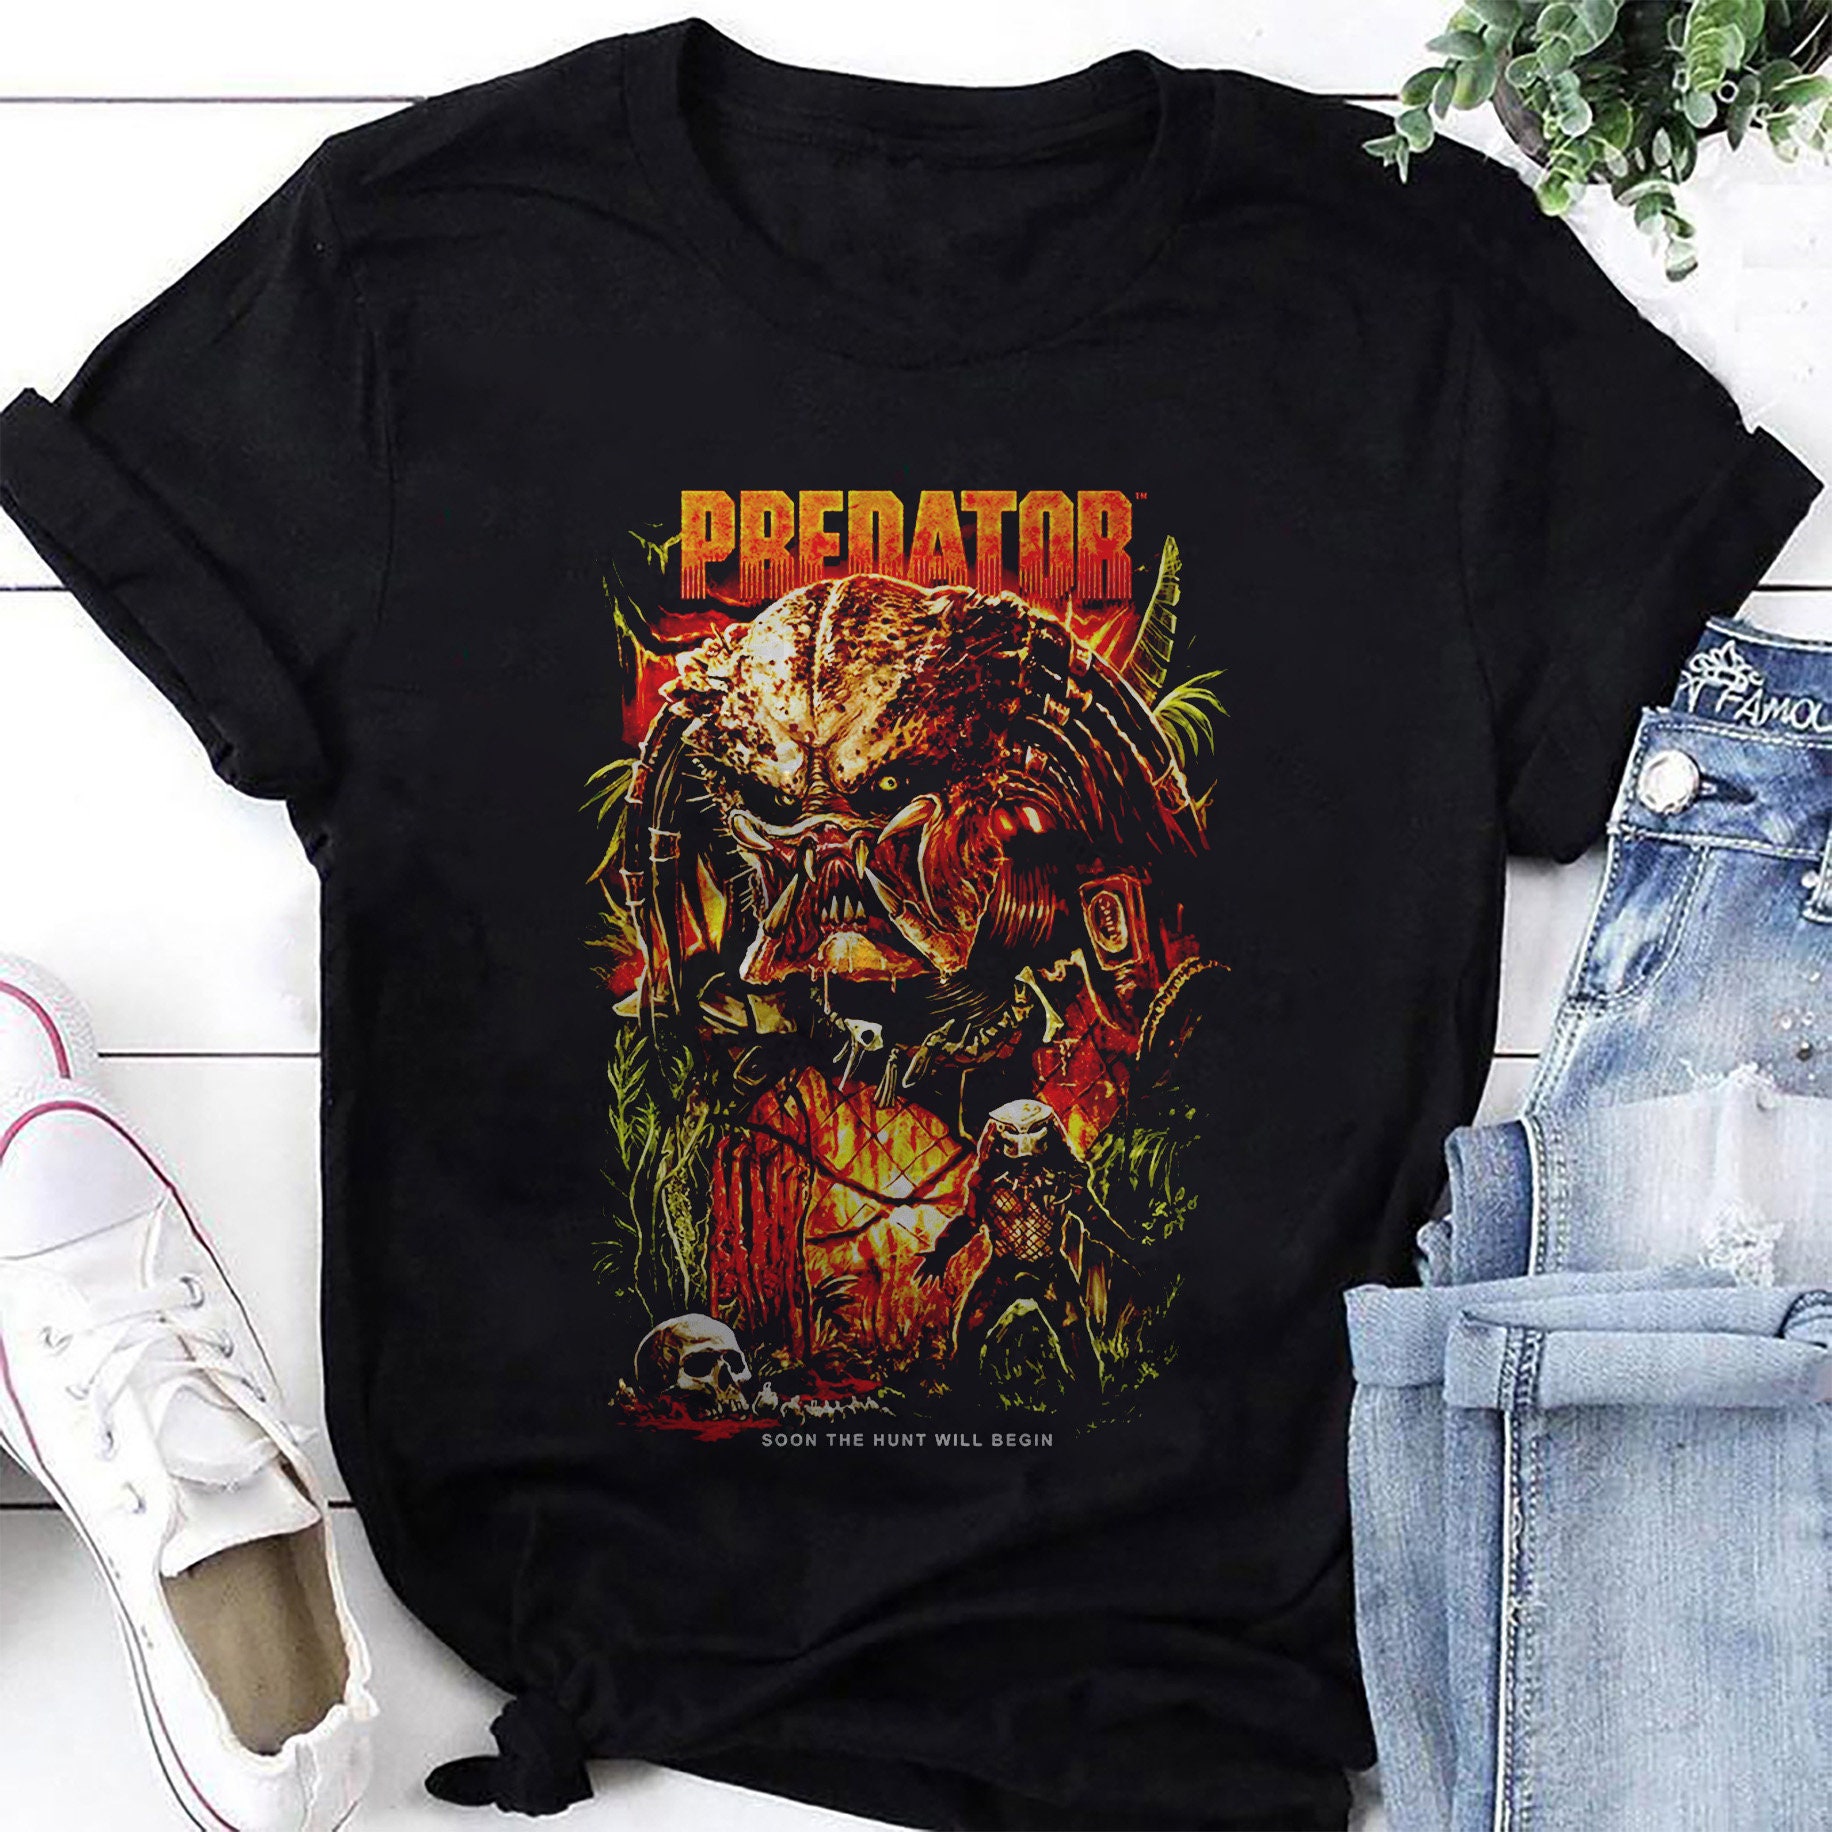 Vintage Dutch And Dillon Handshake Shirt Dillon You Son Of A B Tch T Shirt  Predator 80's Movie Tee Funny Gift Idea Os2002010 - Tailor-made T-shirts -  AliExpress